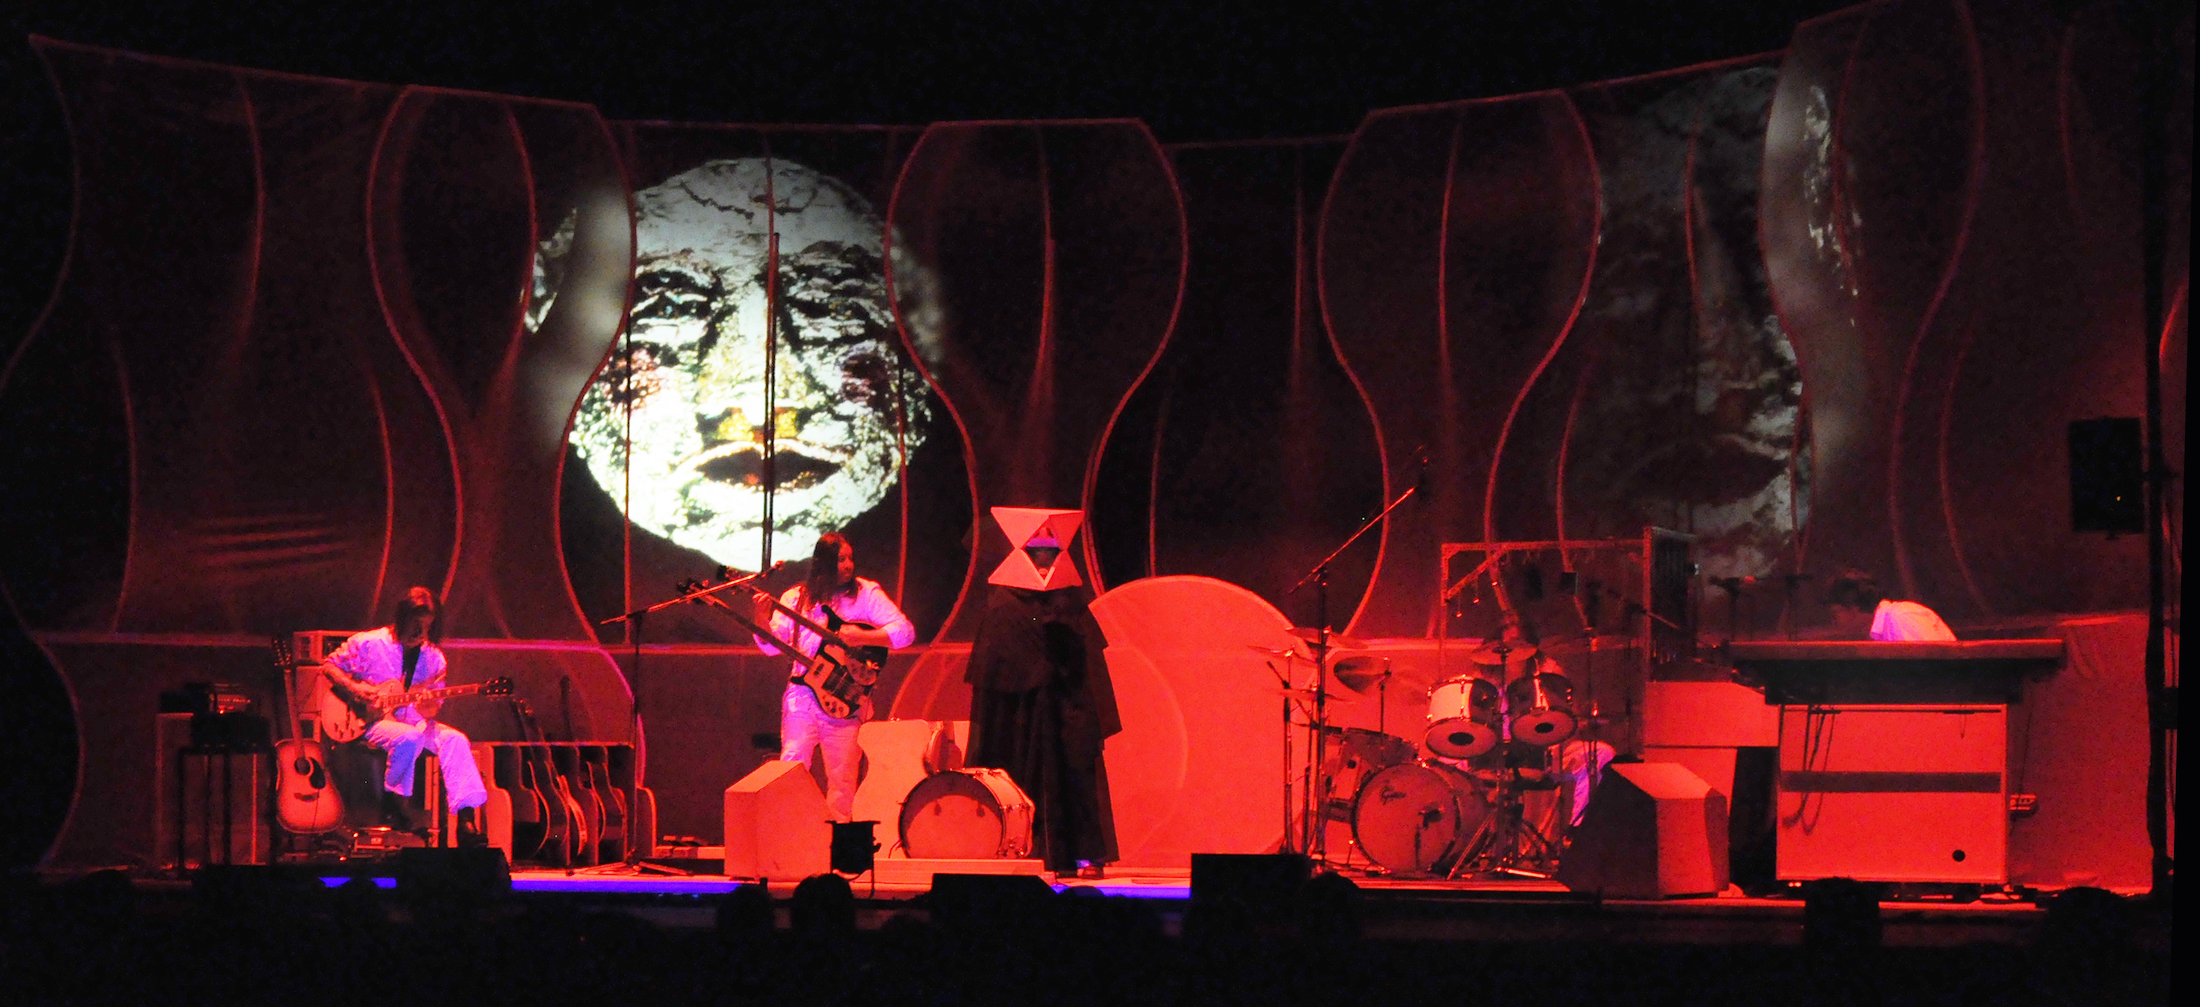 The Musical Box’s Tour Gives Genesis, The Lamb Lies Down on Broadway, Deluxe Treatment